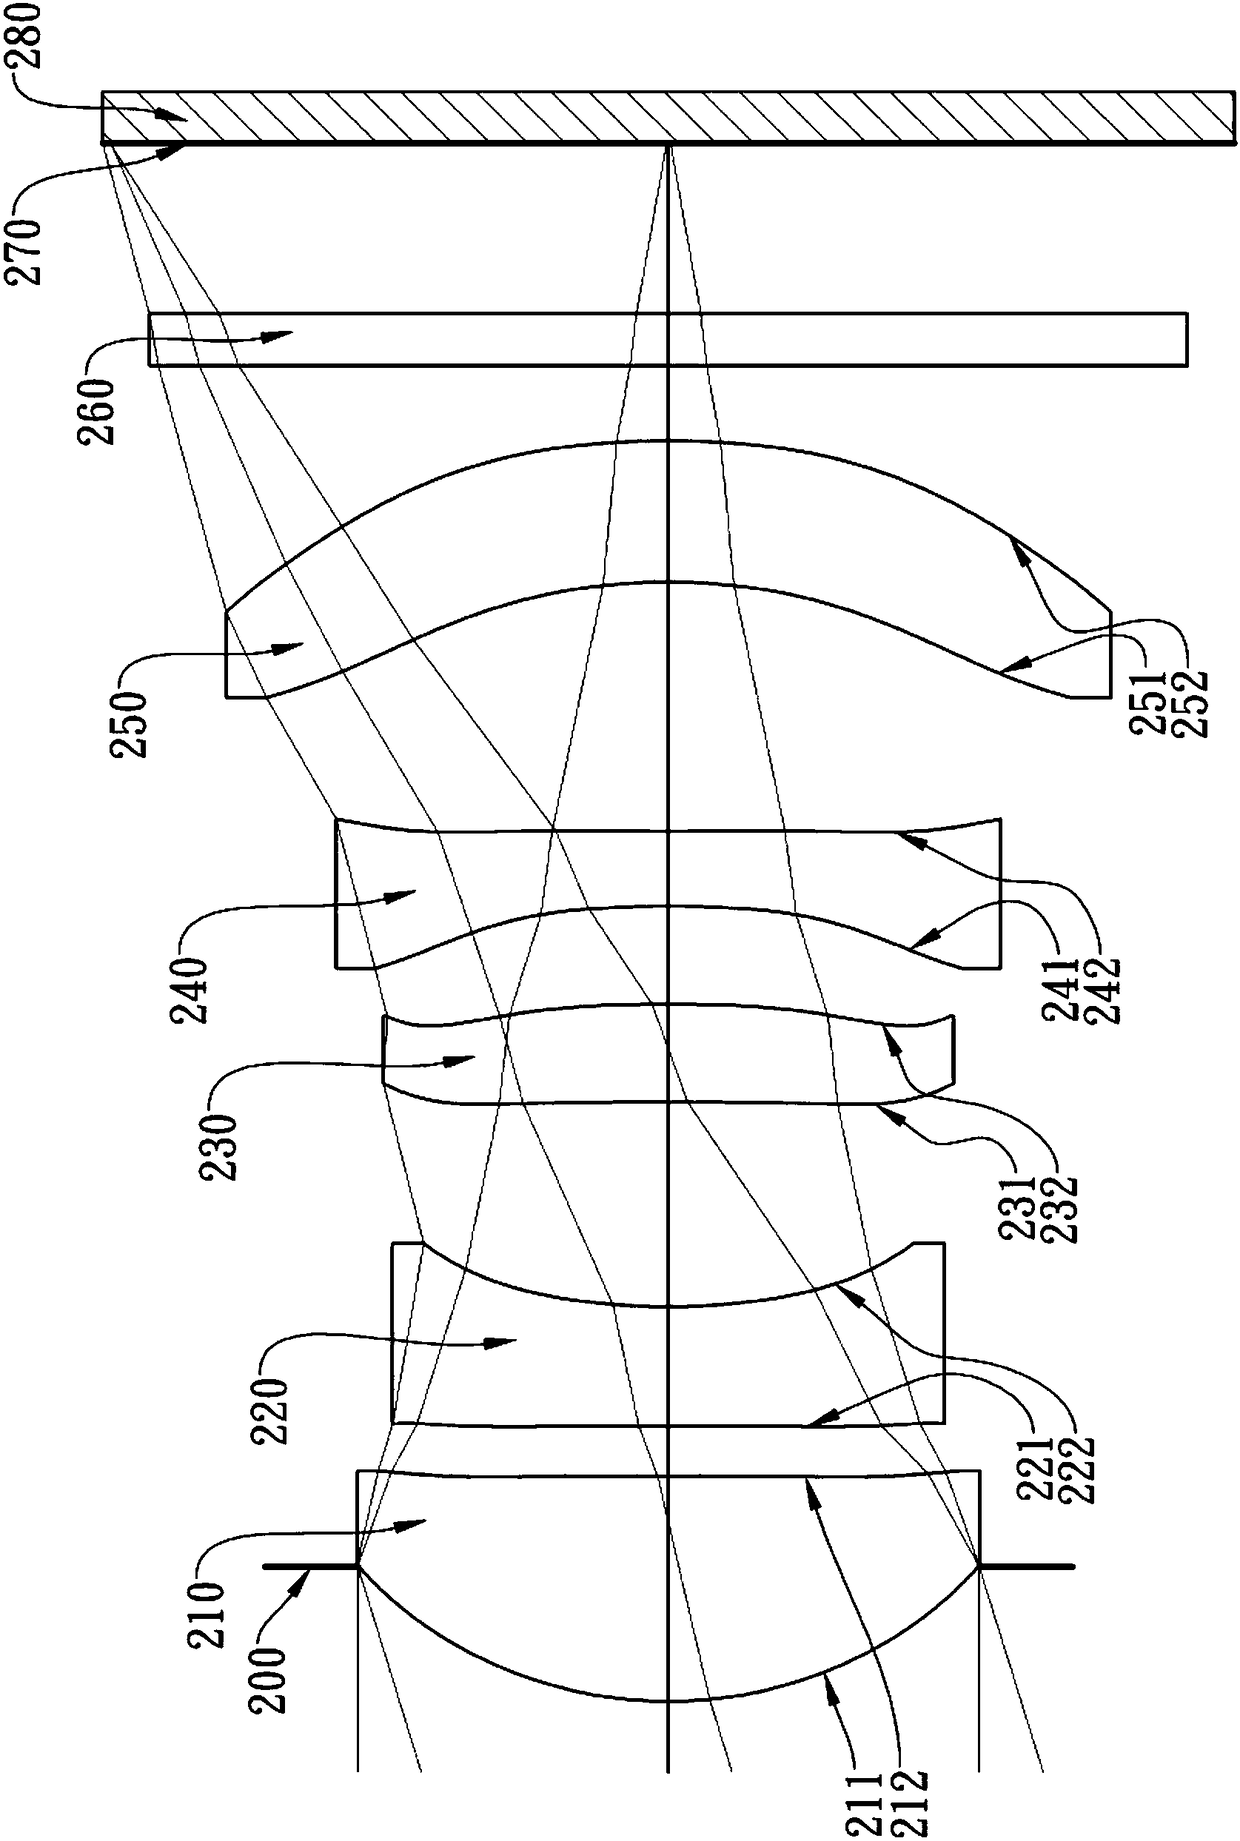 Imaging lens system, imaging device and electronic device